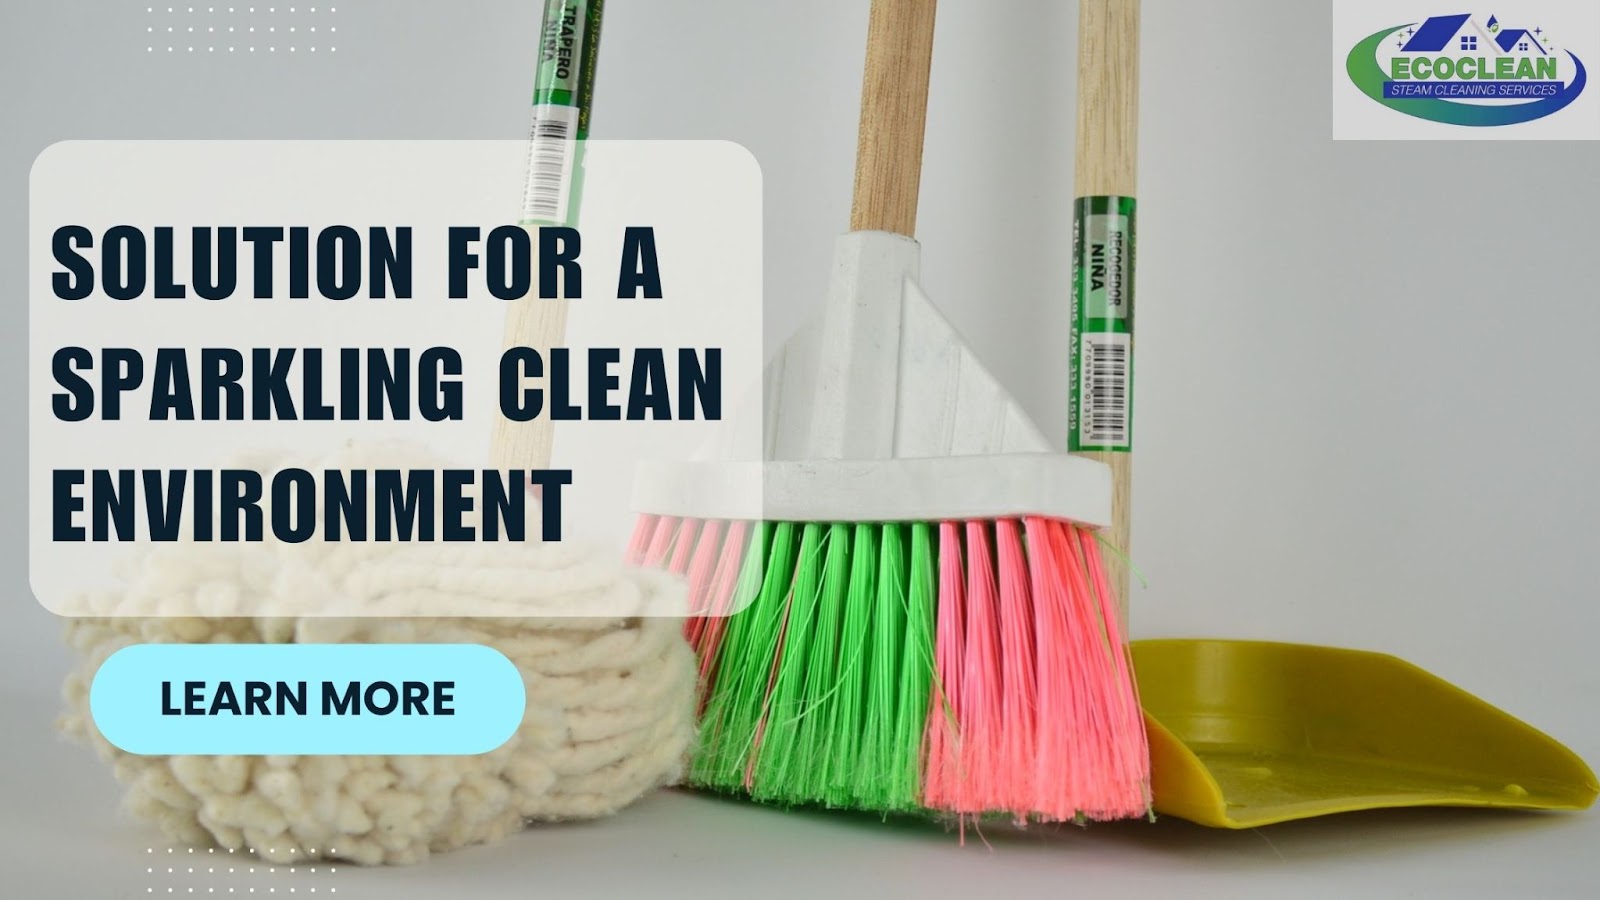 Ecoclean Cleaning Service: Your One-Stop Solution for a Sparkling Clean Environment